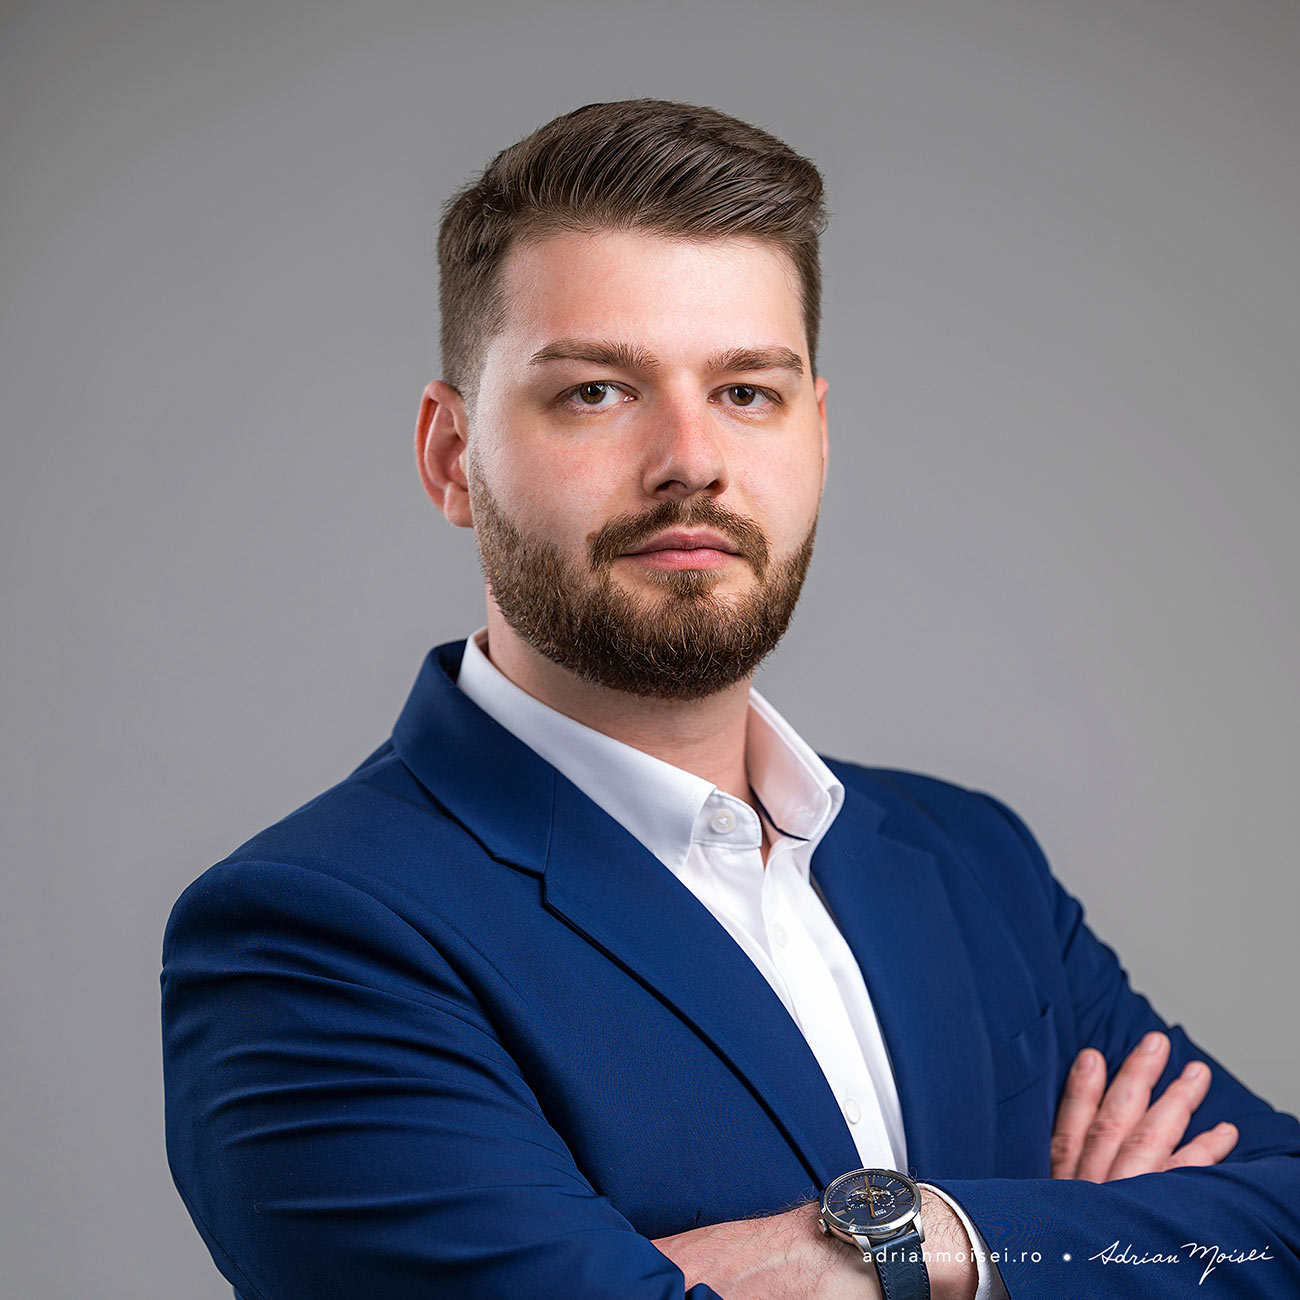 Profile photos for skilled freelancer in mobile solutions for iOS and Android - studio foto video in Iasi - fotograf Iasi Adrian Moisei